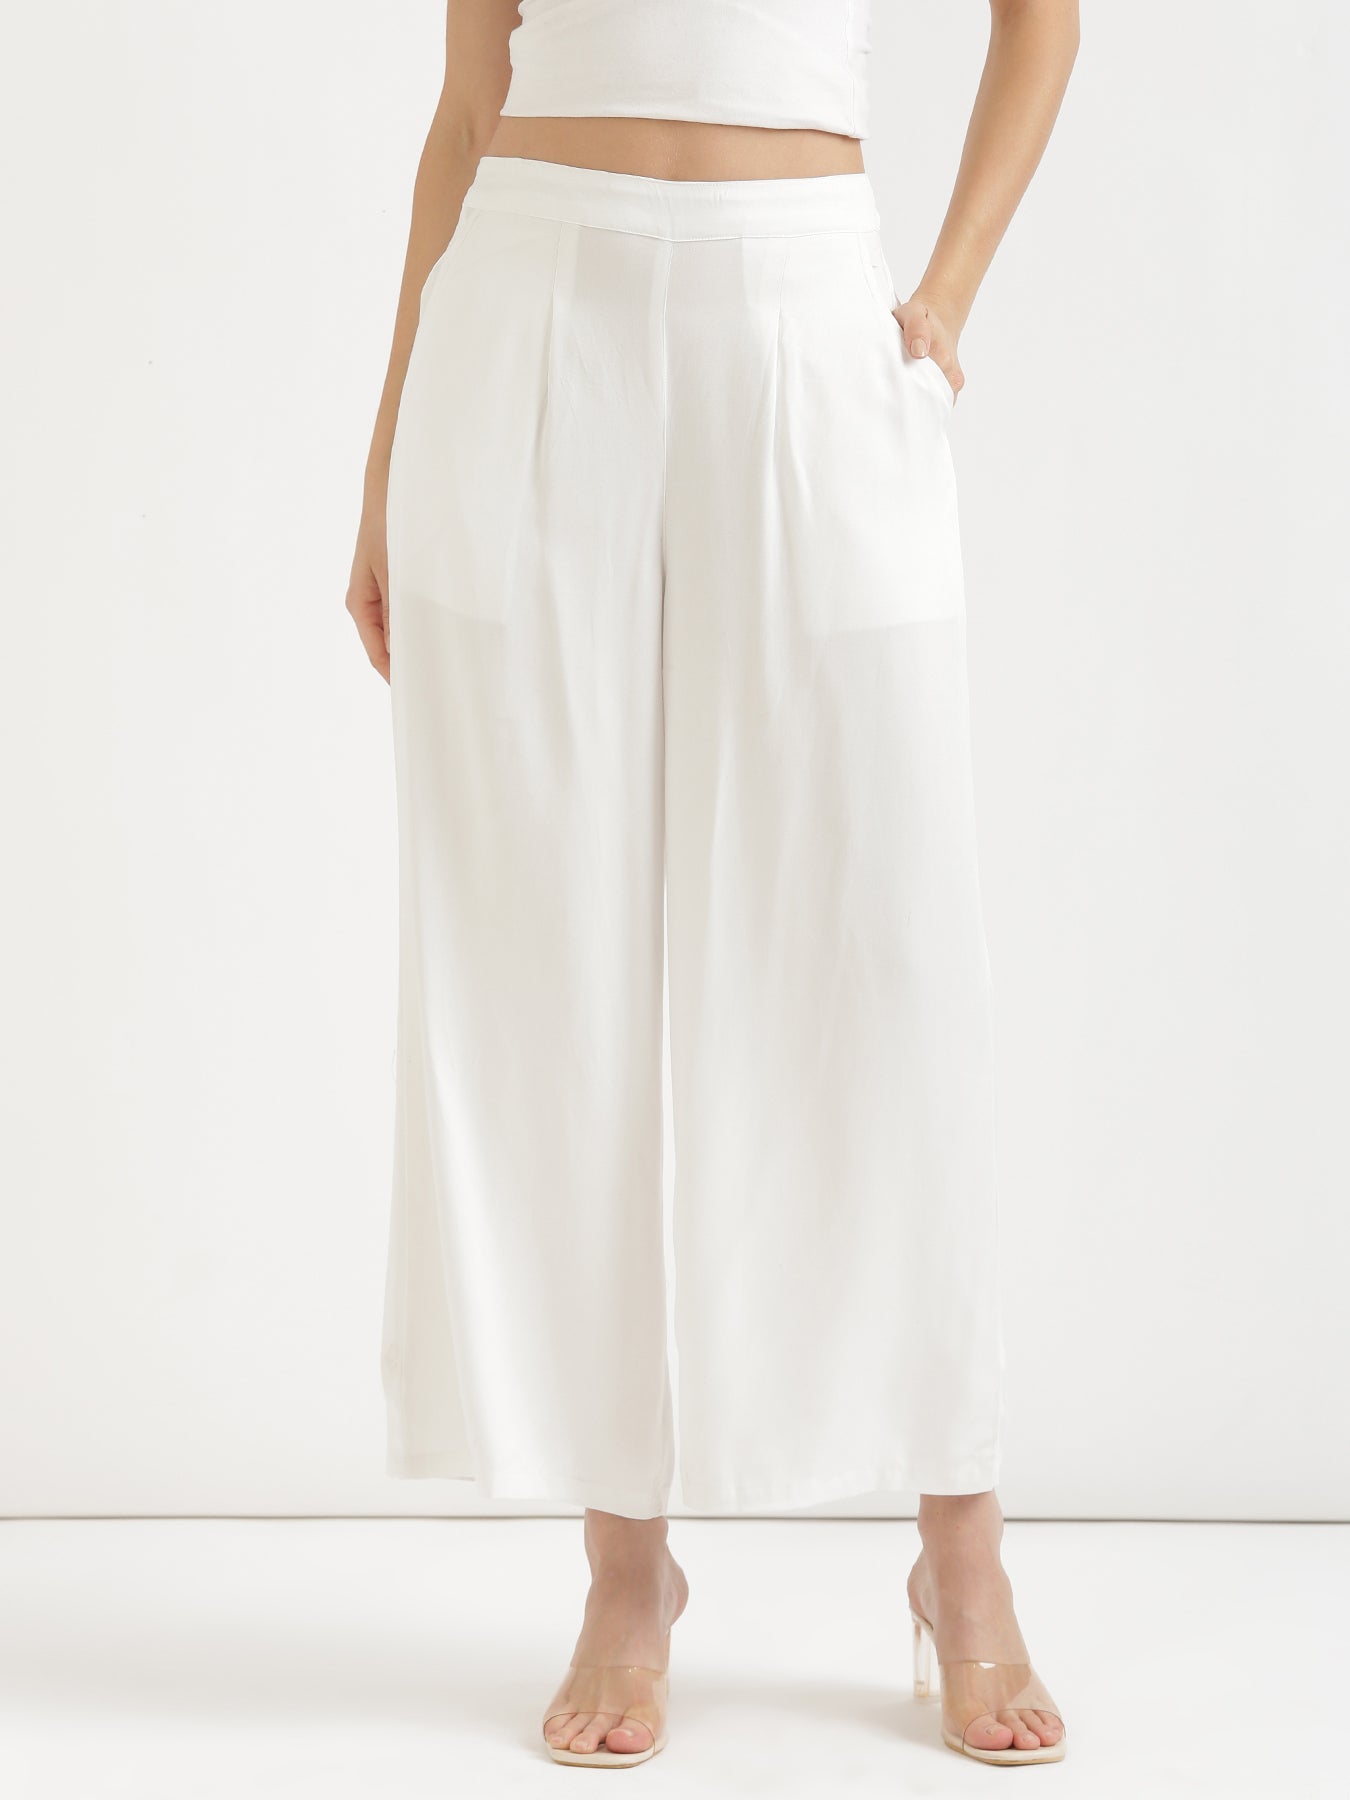 White palazzo pants by Free Living